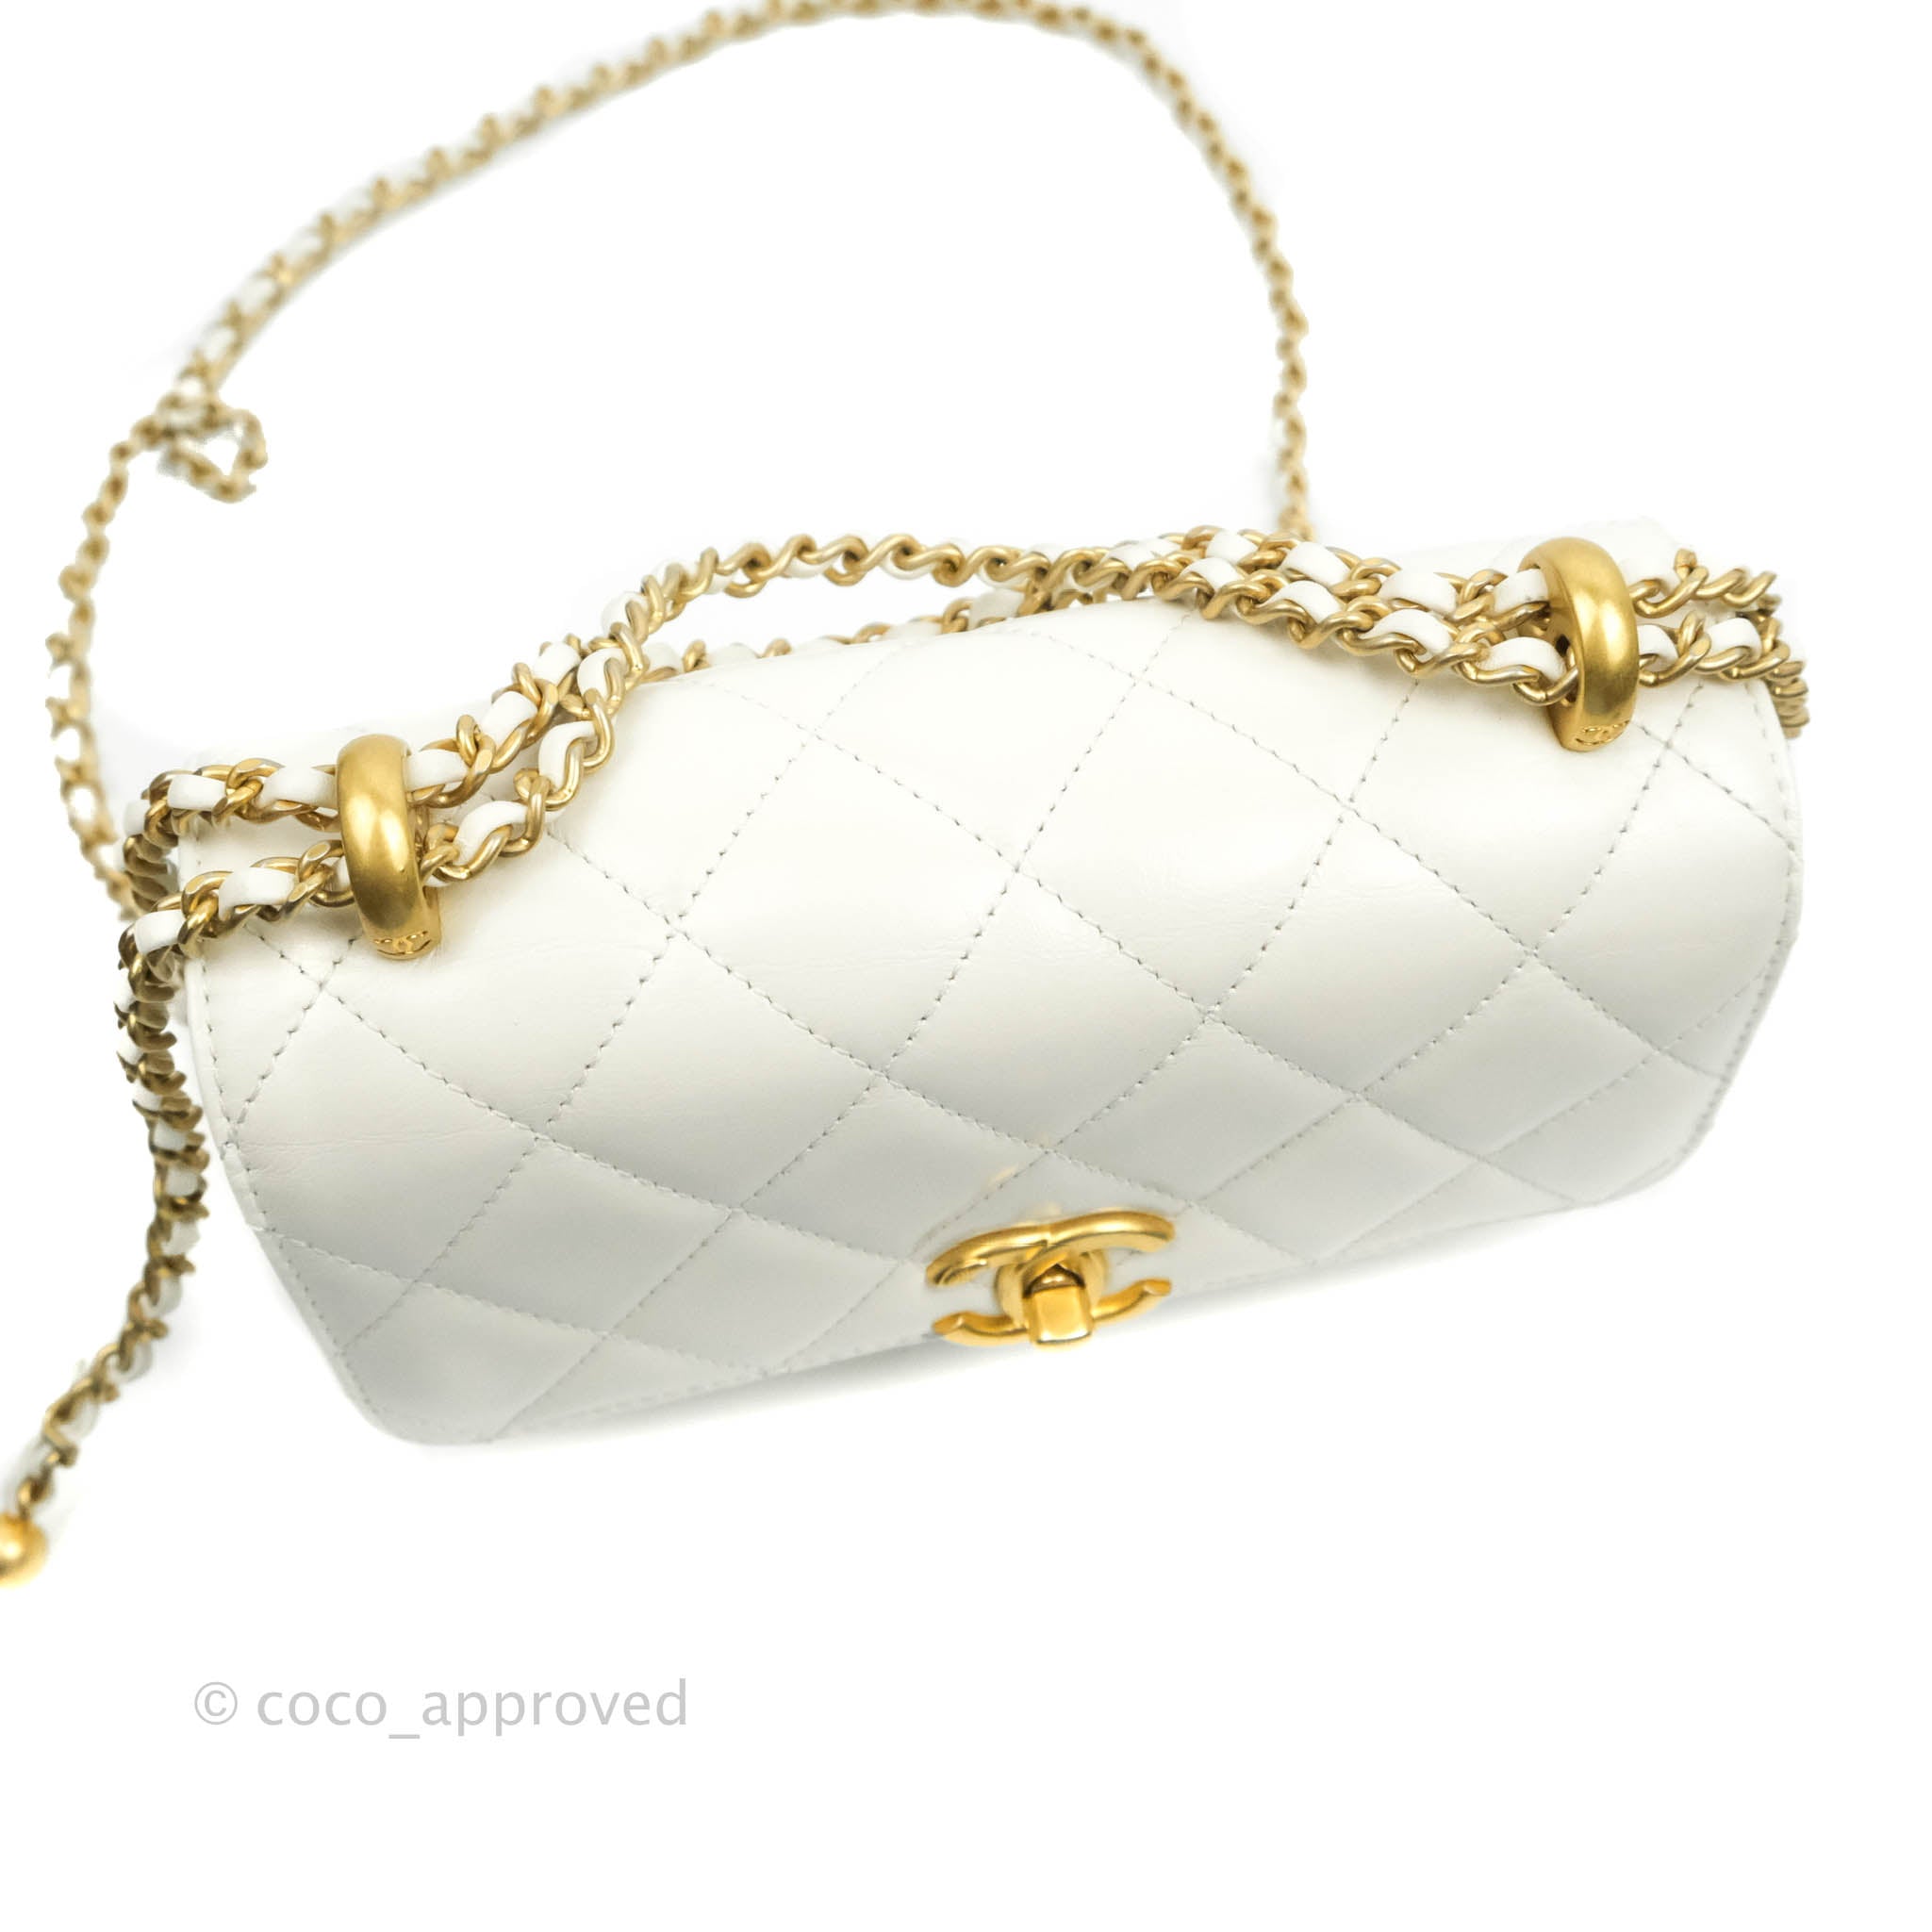 chanel perfect fit flap bag